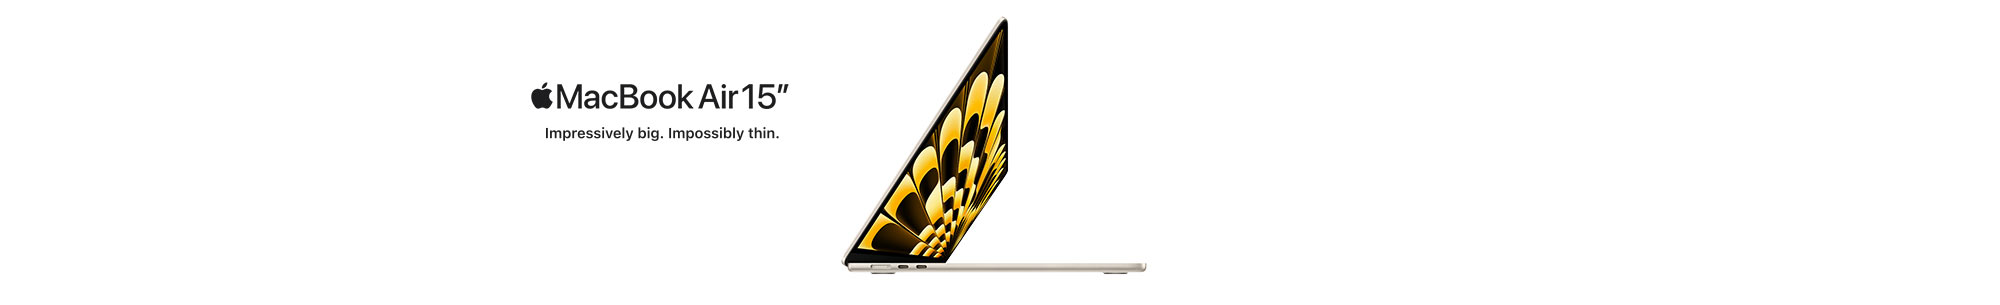 MacBook Air 15-inch. Impressively big. Impossibly thin.